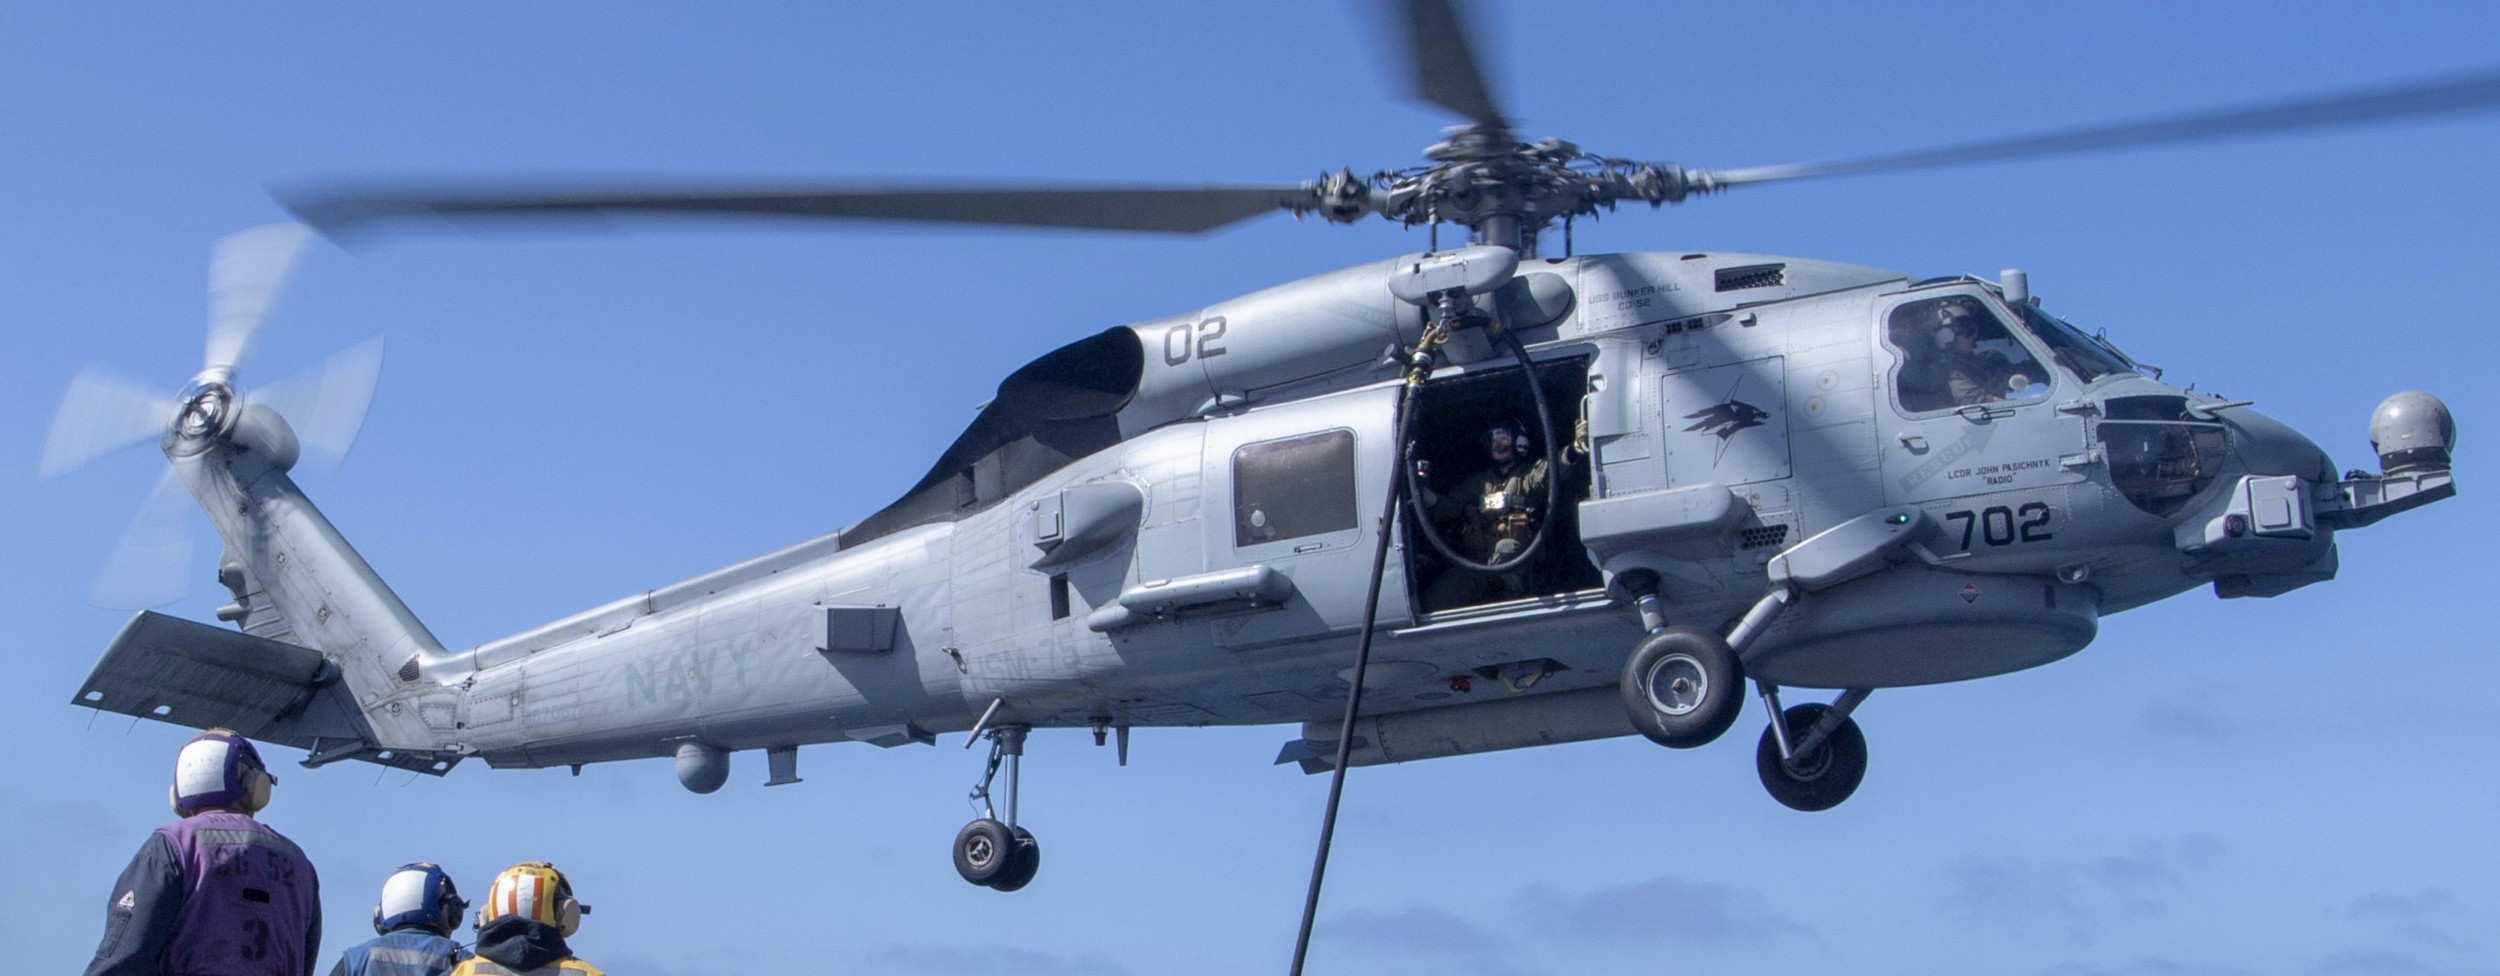 hsm-75 wolf pack helicopter maritime strike squadron mh-60r seahawk cg-52 uss bunker hill 2021 97